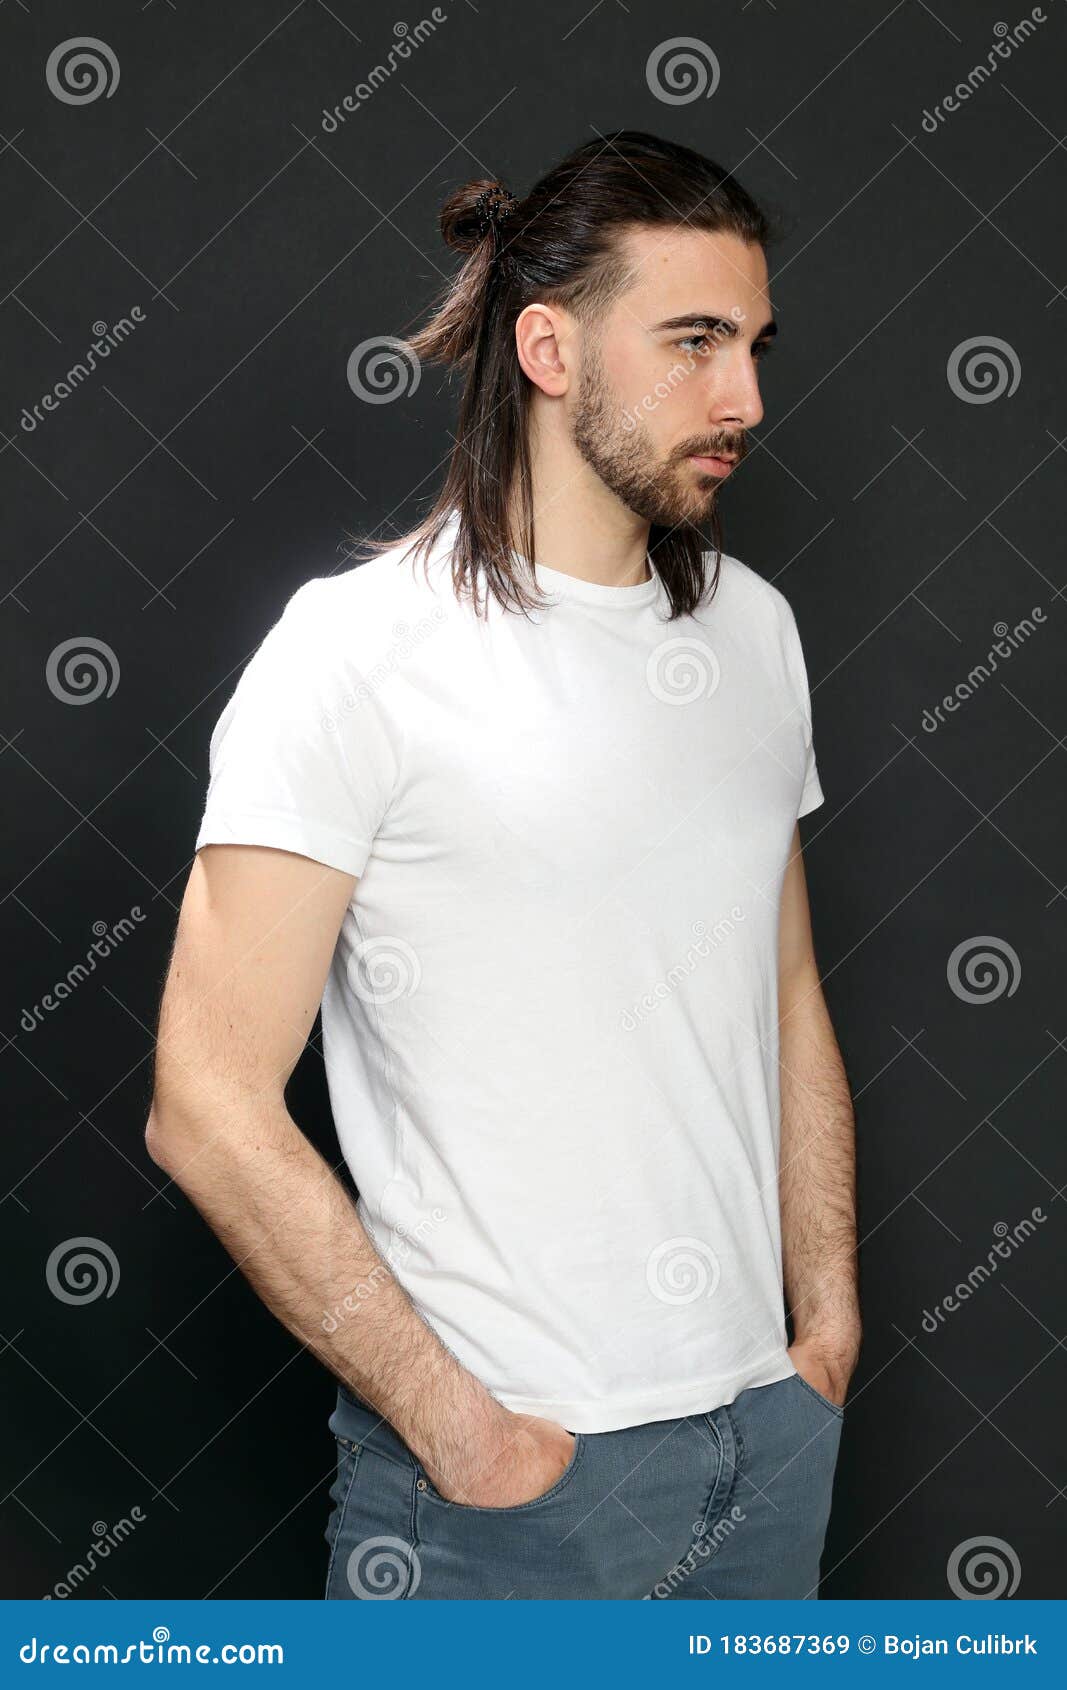 Stylish Male Model with Long Hair and Beard Posing in Studio. Modeling,  Hairstyle, Fashion Concept. Stock Image - Image of adult, gesture: 183687369